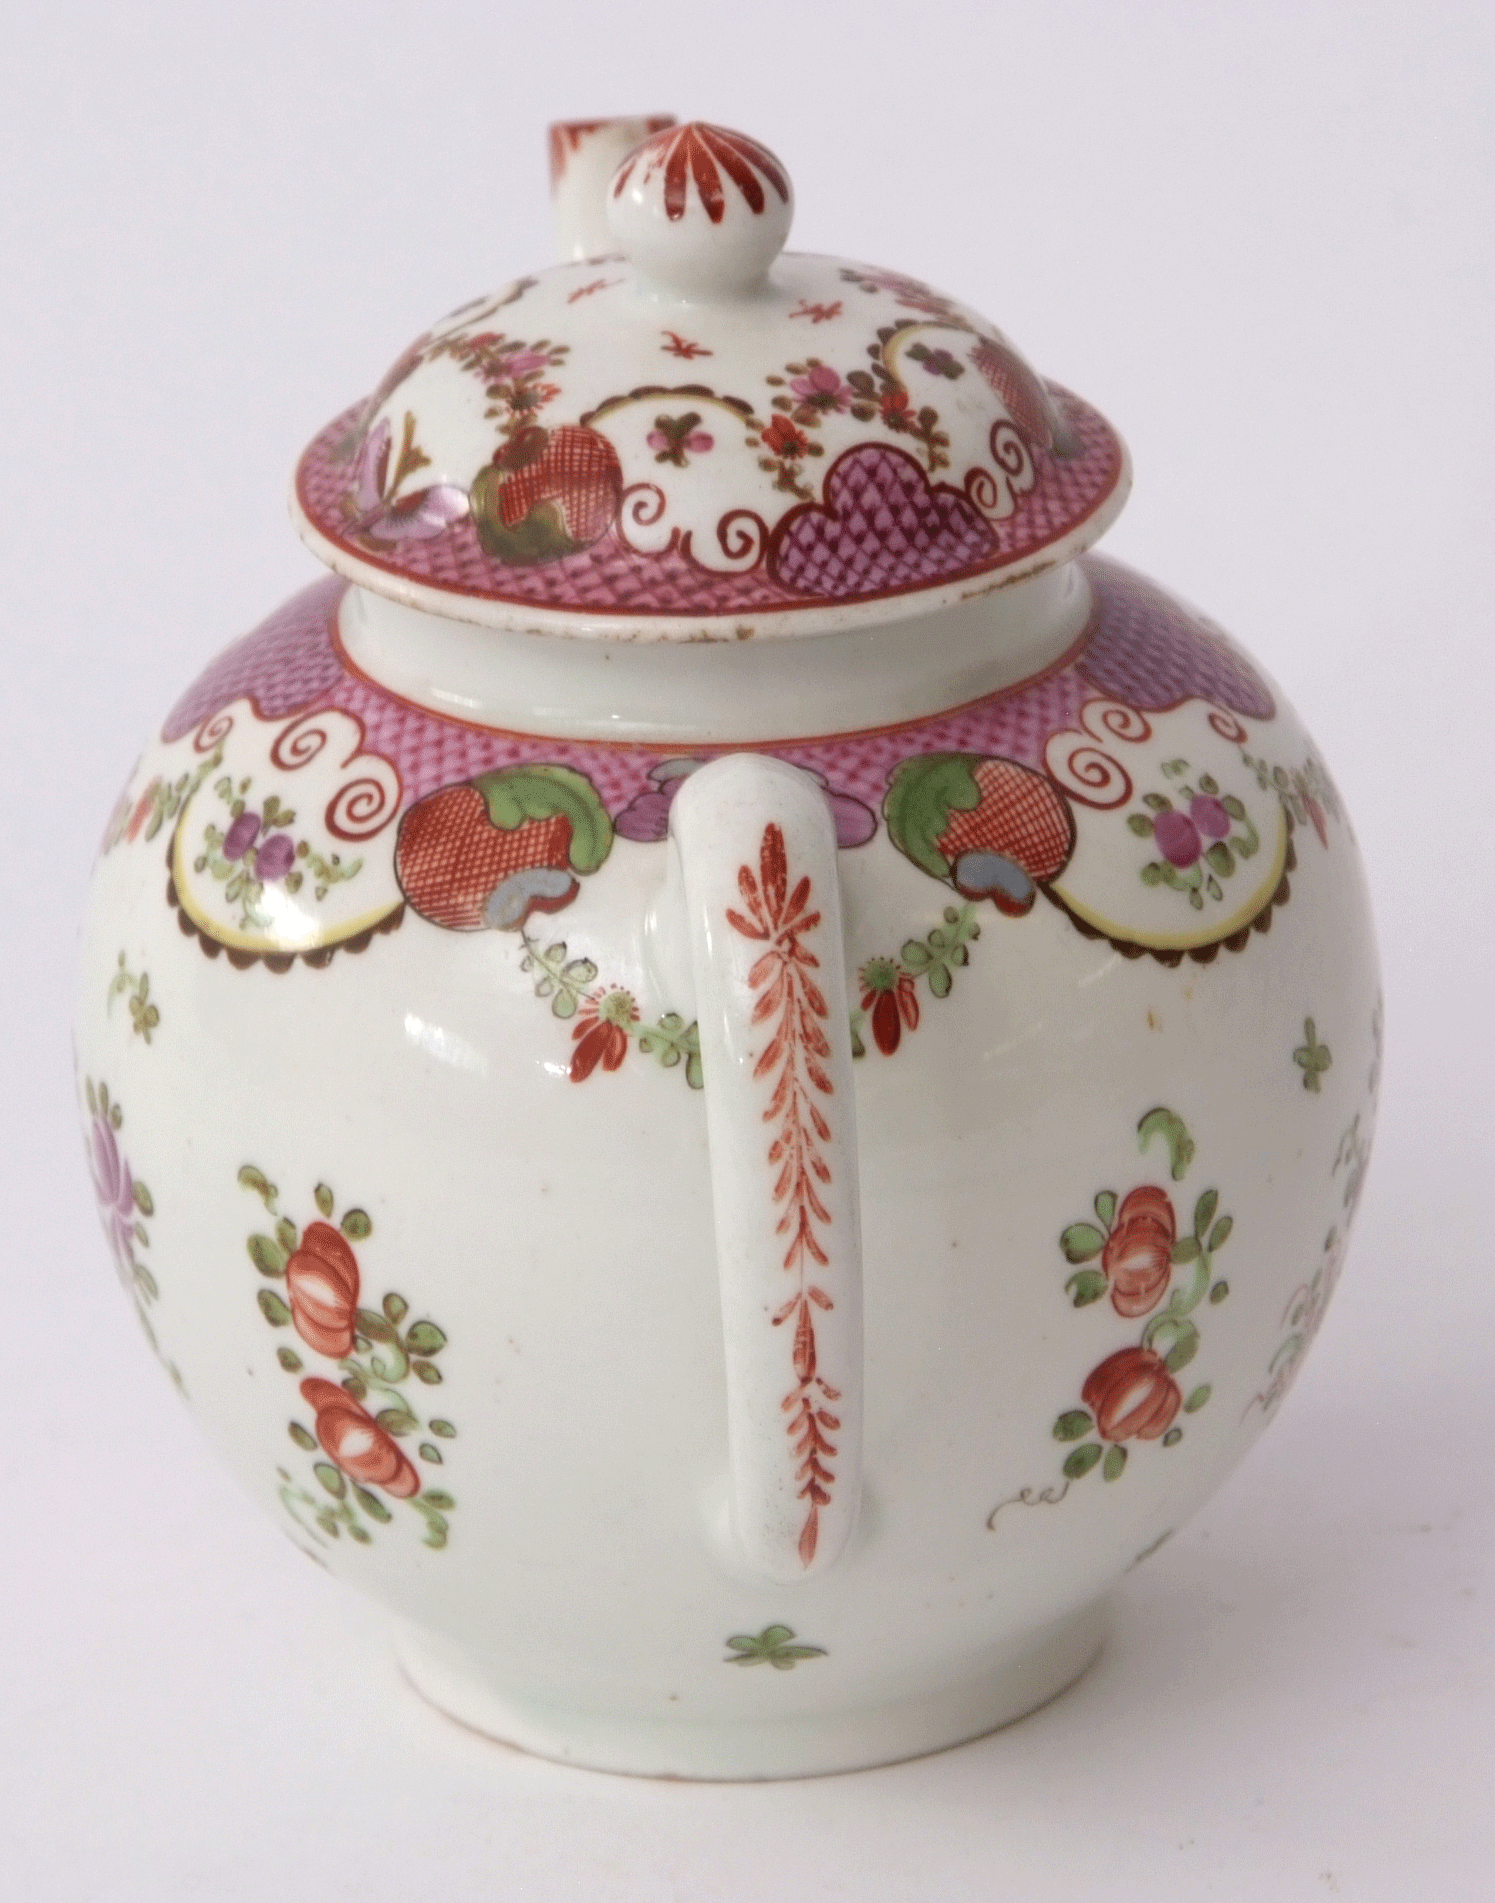 Lowestoft porcelain tea pot and cover circa 1780, decorated in polychrome with a Curtis type design, - Image 4 of 4